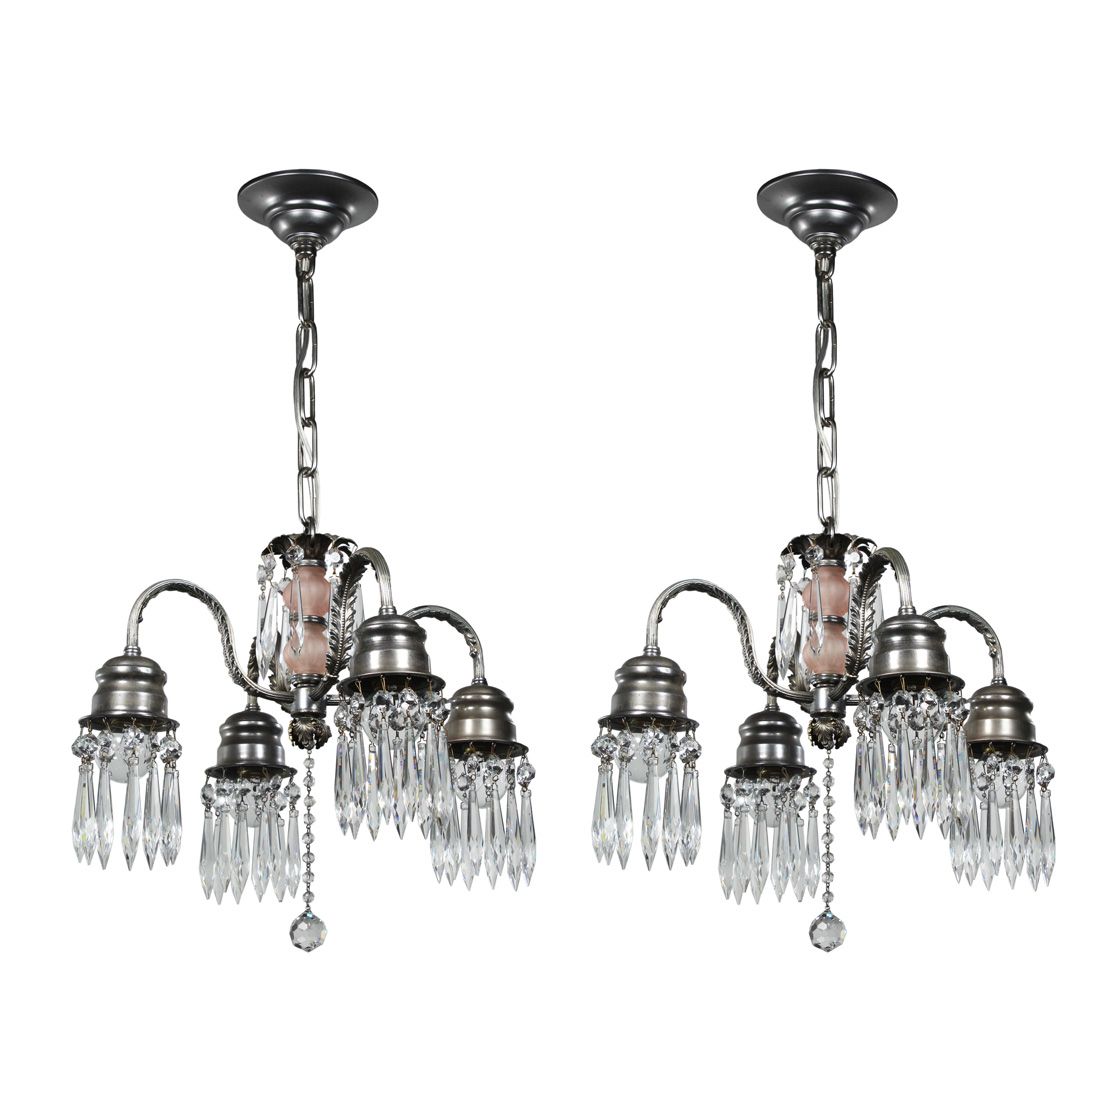 Sold Matching Antique Four Light Chandeliers With Prisms For Four Light Antique Silver Chandeliers (View 4 of 15)